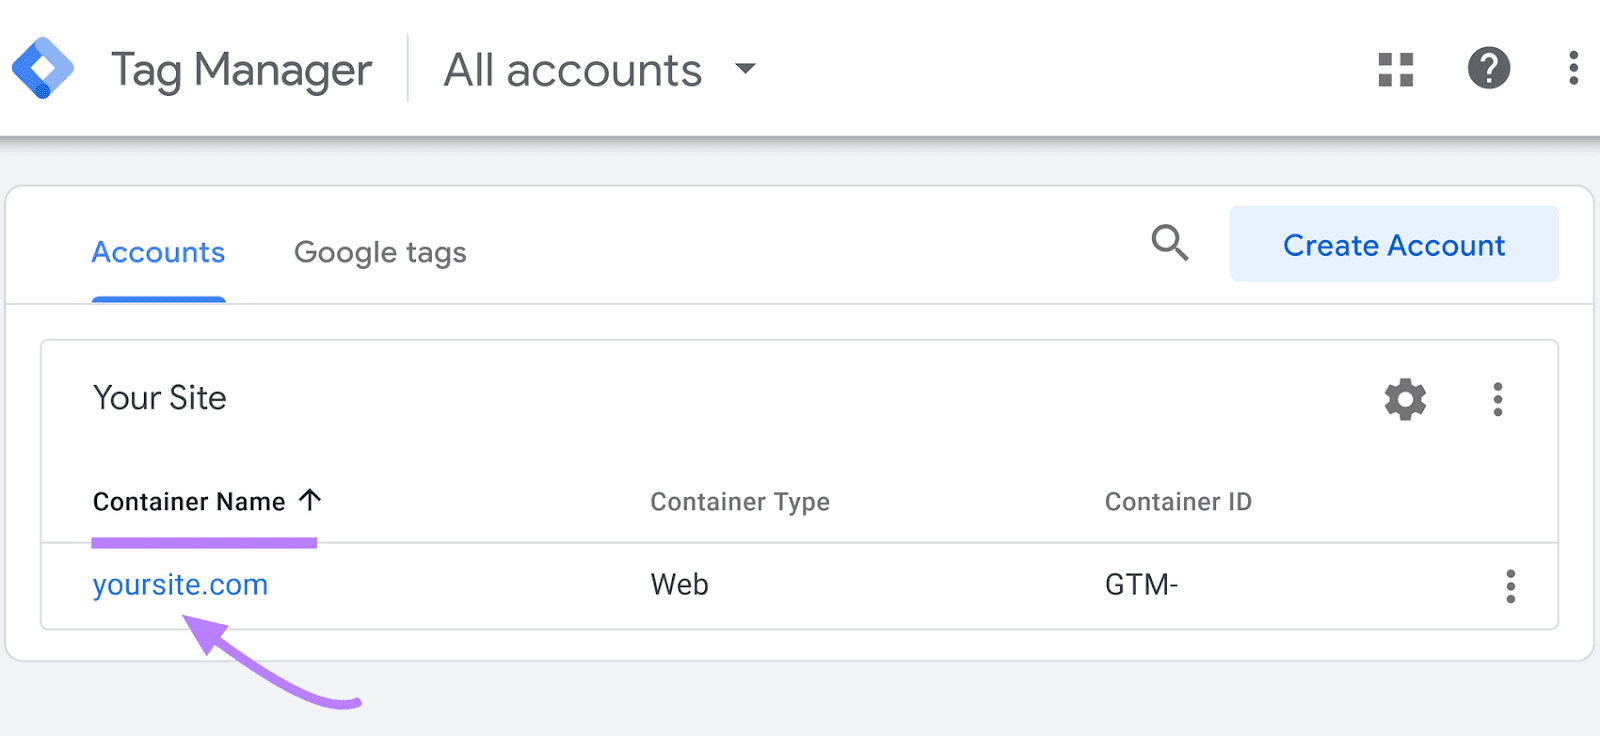 "yoursite.com" selected under “Container Name” in Tag Manager